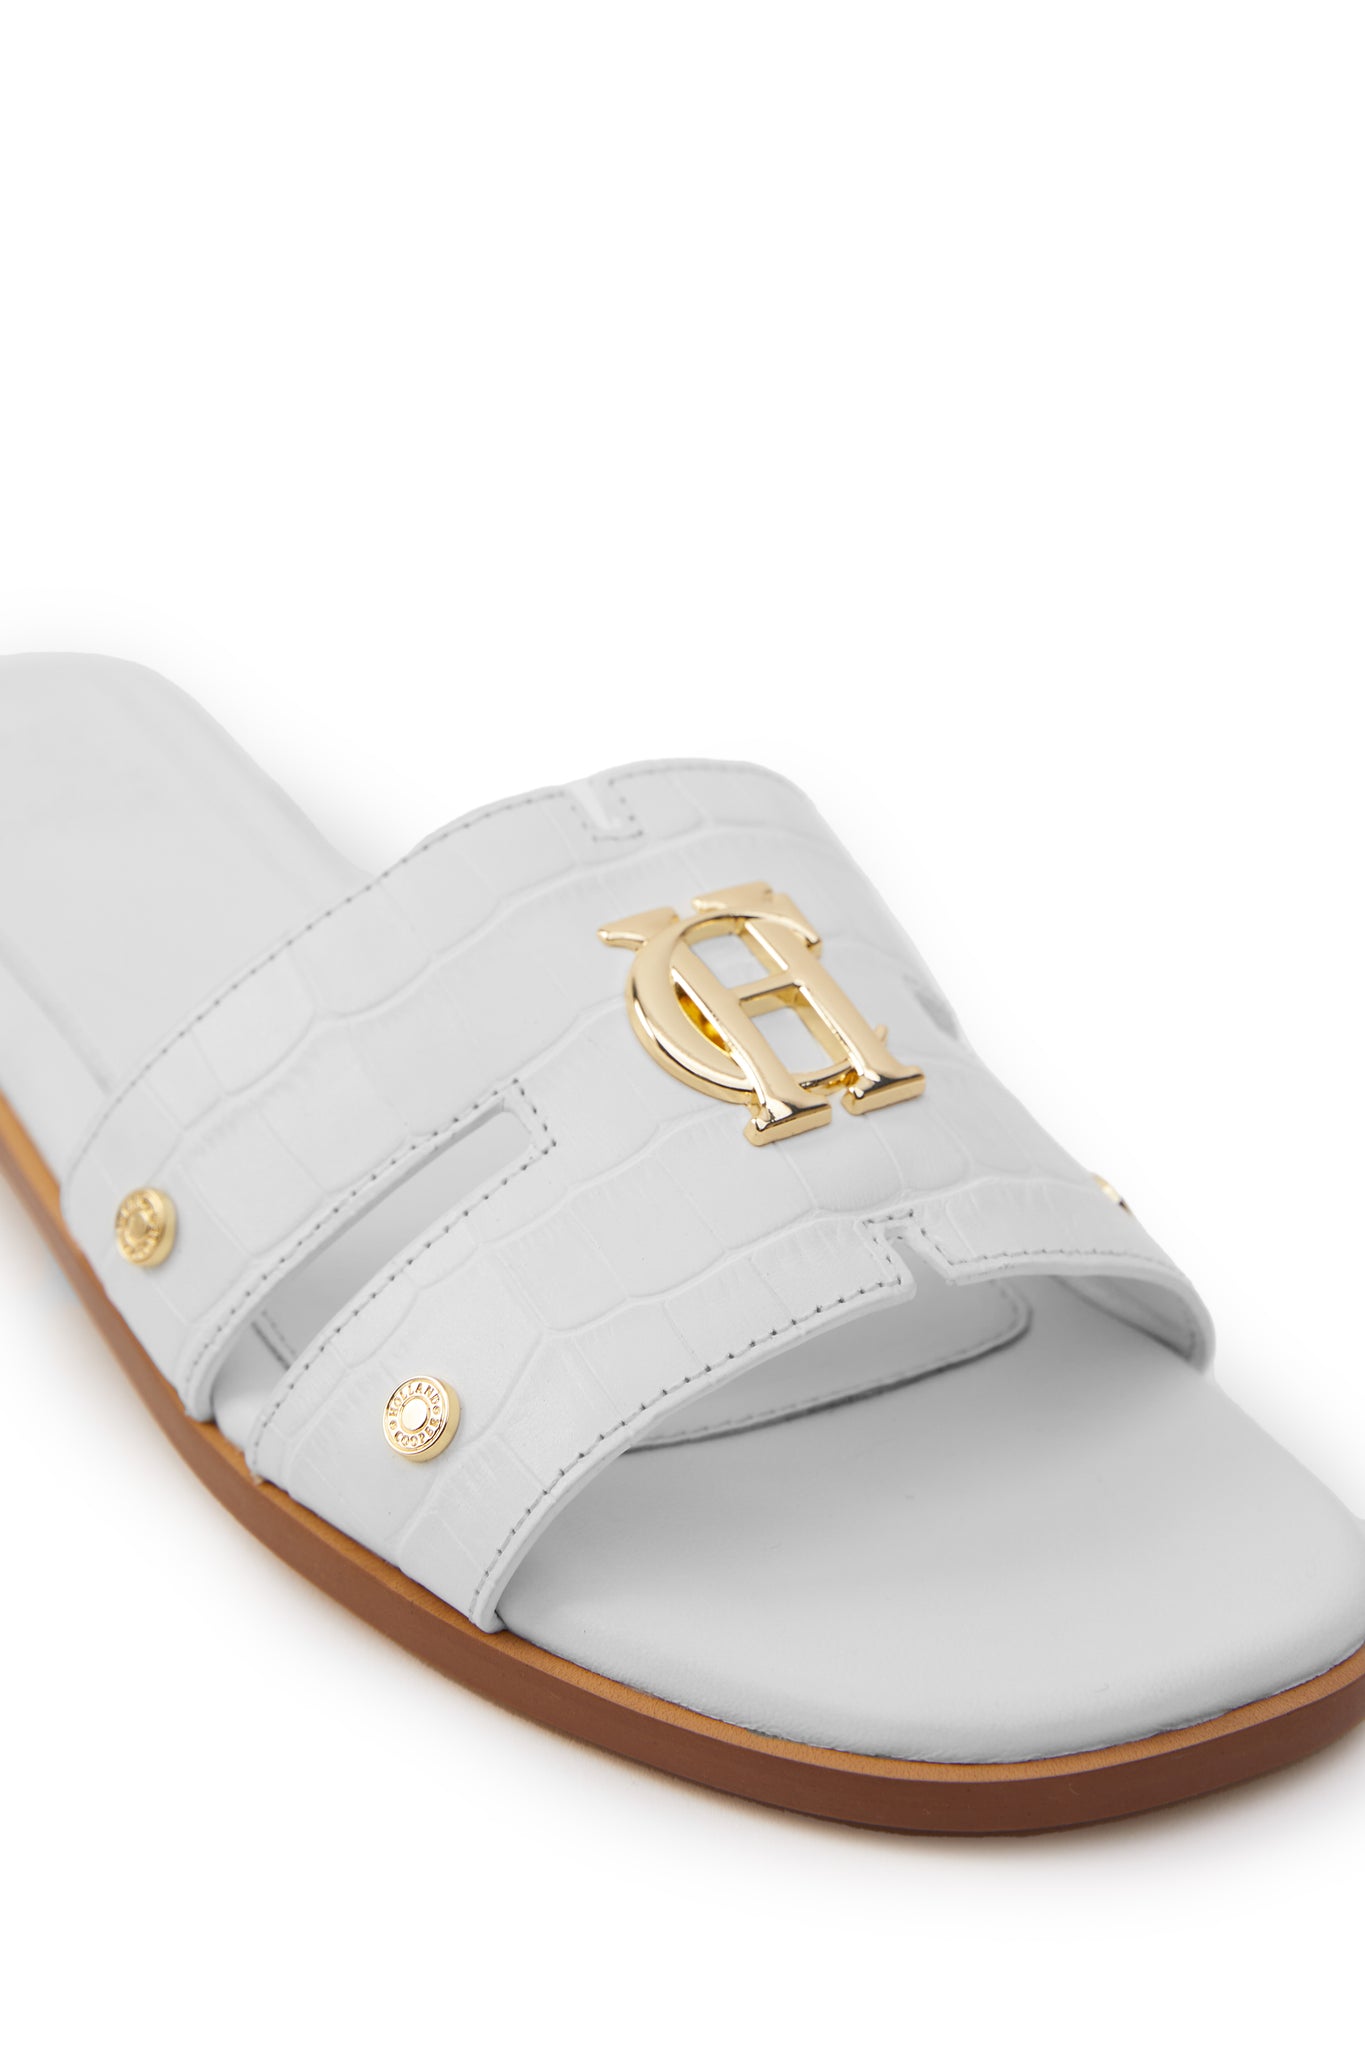 Close up of white croc embossed leather sliders with a tan leather sole and gold hardware